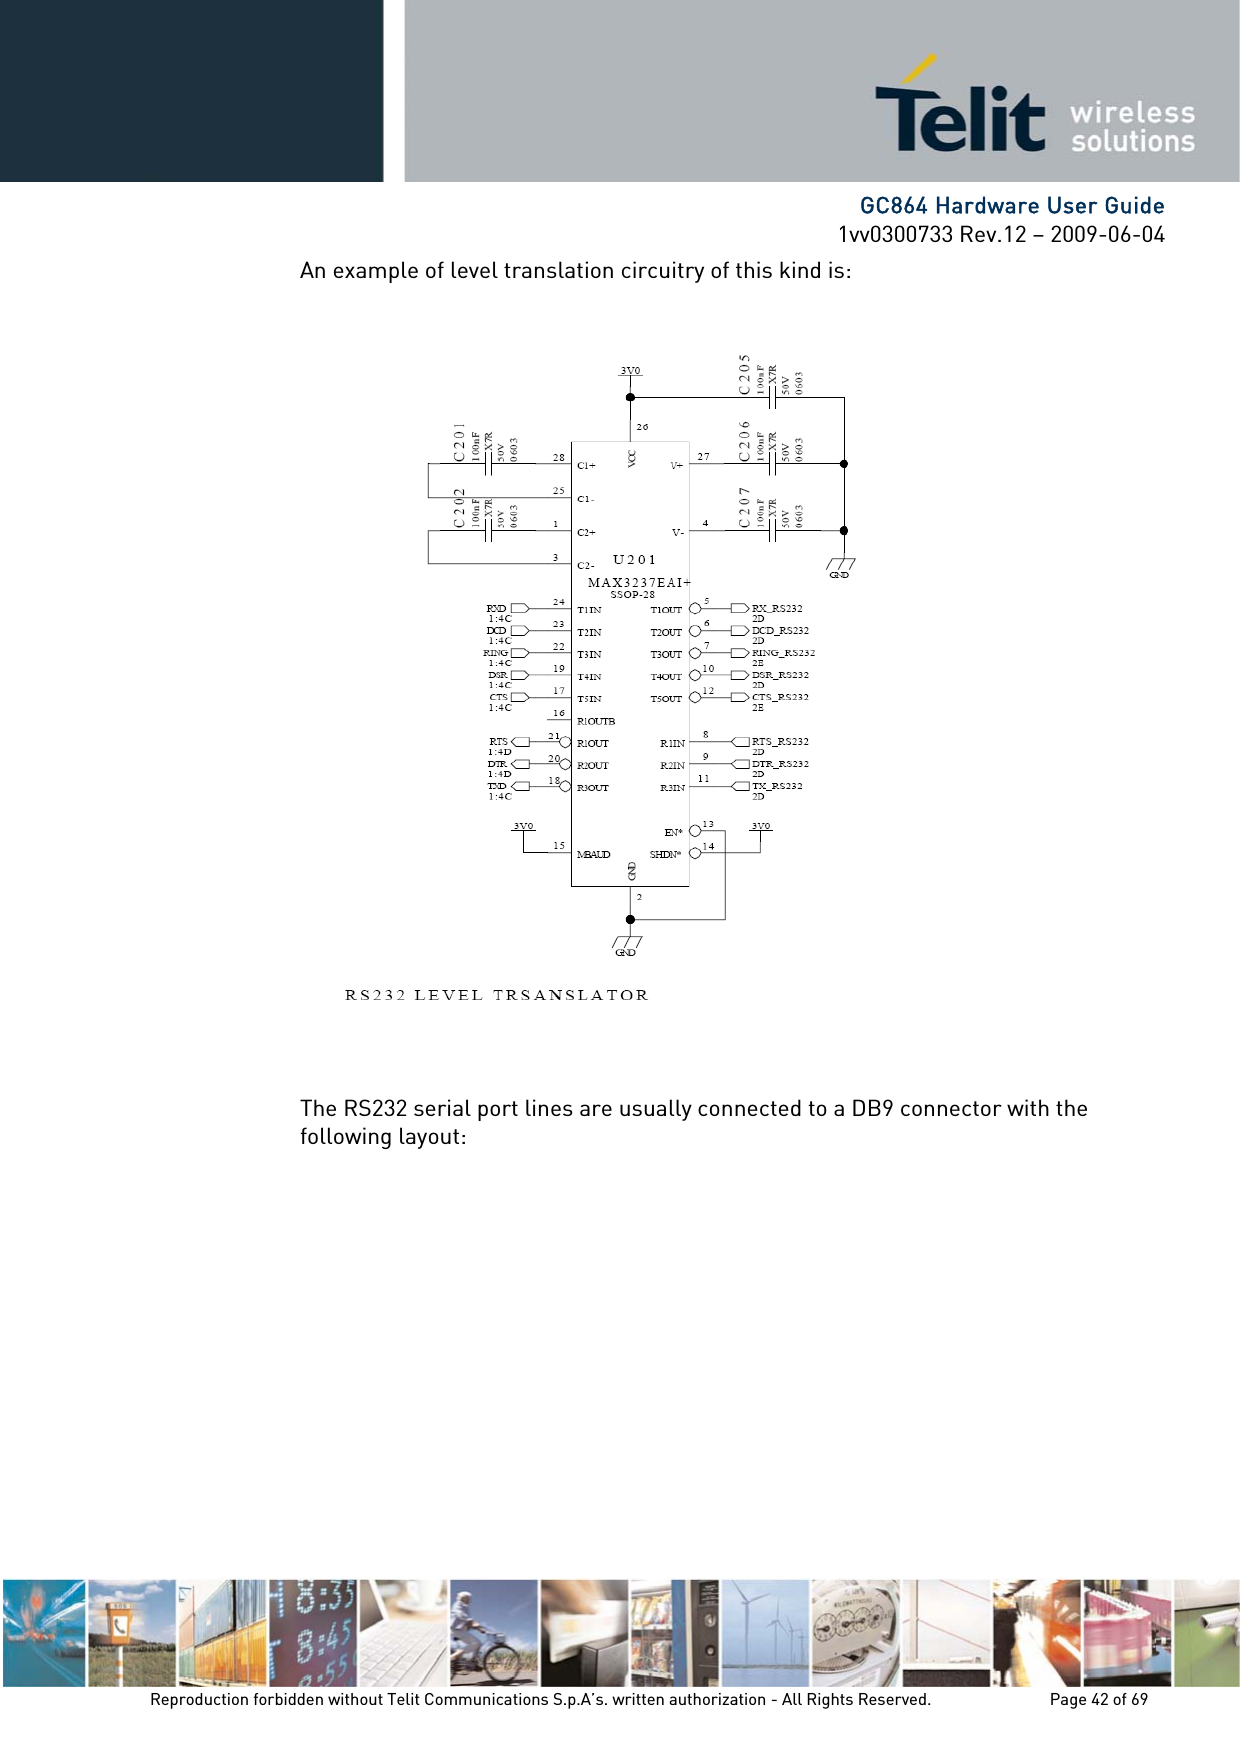      GC864 Hardware User Guide 1vv0300733 Rev.12 – 2009-06-04 An example of level translation circuitry of this kind is:   The RS232 serial port lines are usually connected to a DB9 connector with the following layout: Reproduction forbidden without Telit Communications S.p.A’s. written authorization - All Rights Reserved.    Page 42 of 69  